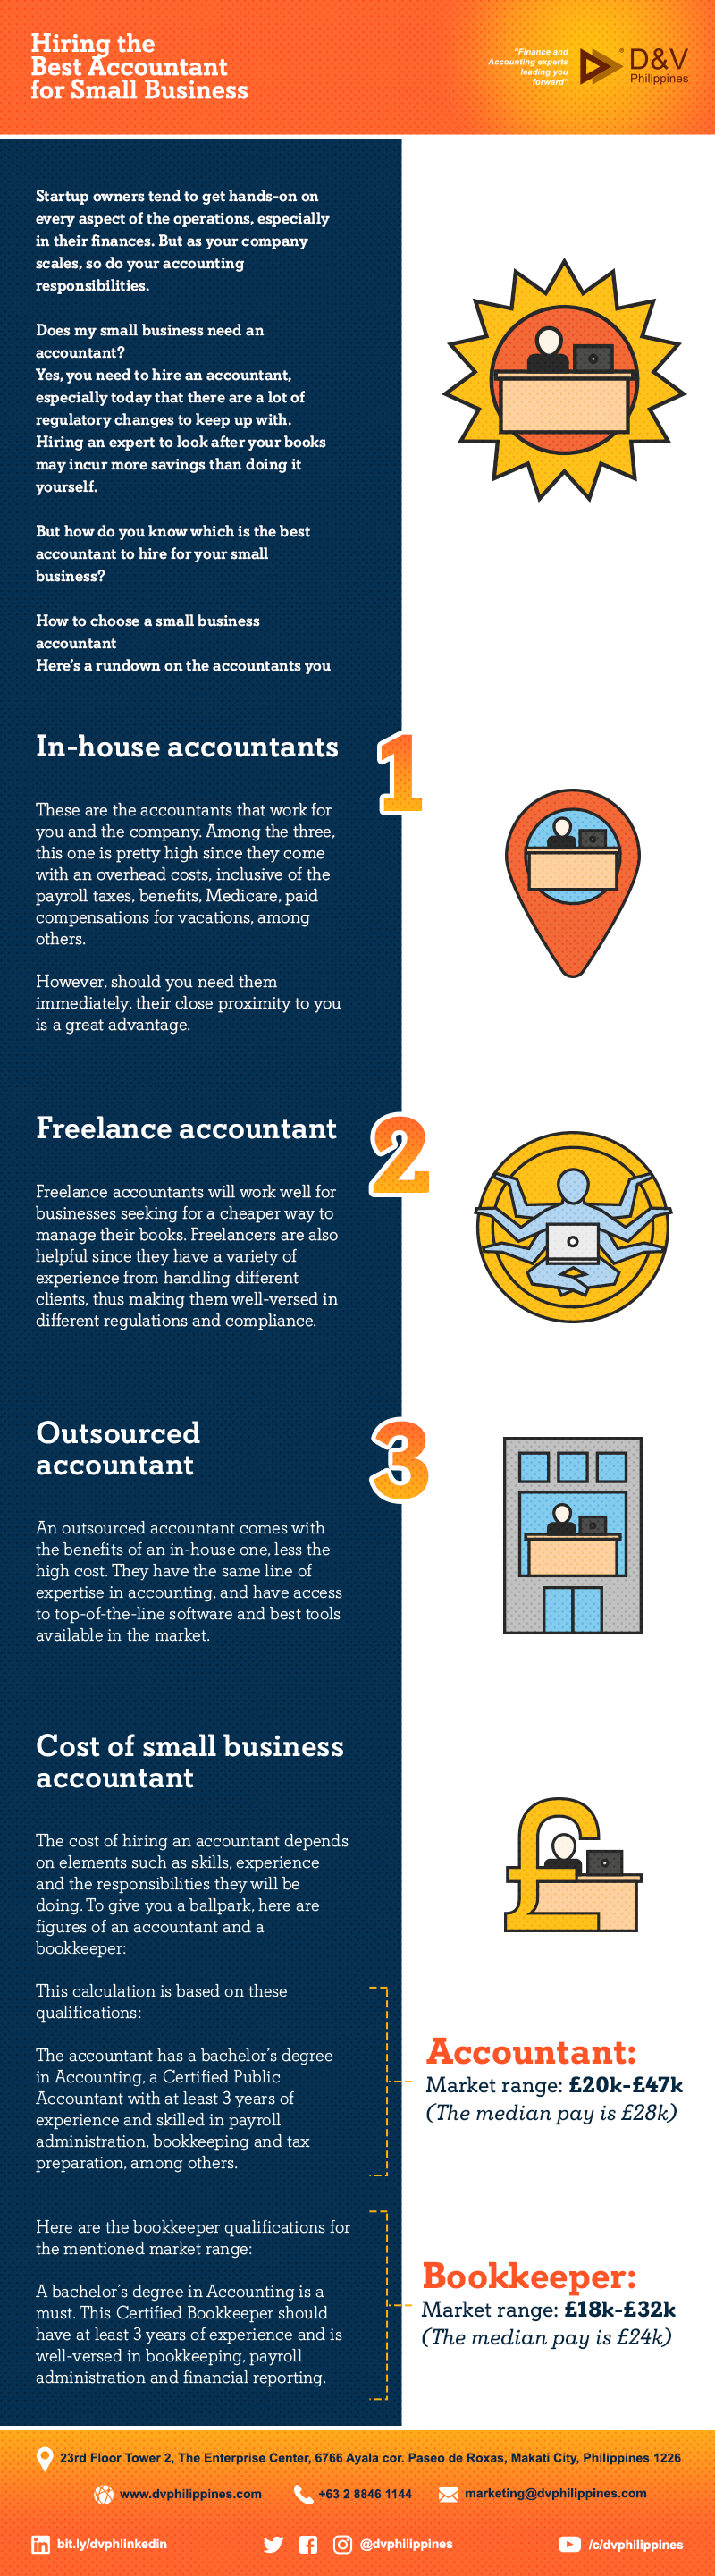 Infograpihcs_Hiring-the-Best-Accountant-for-Small-Business_Main-1